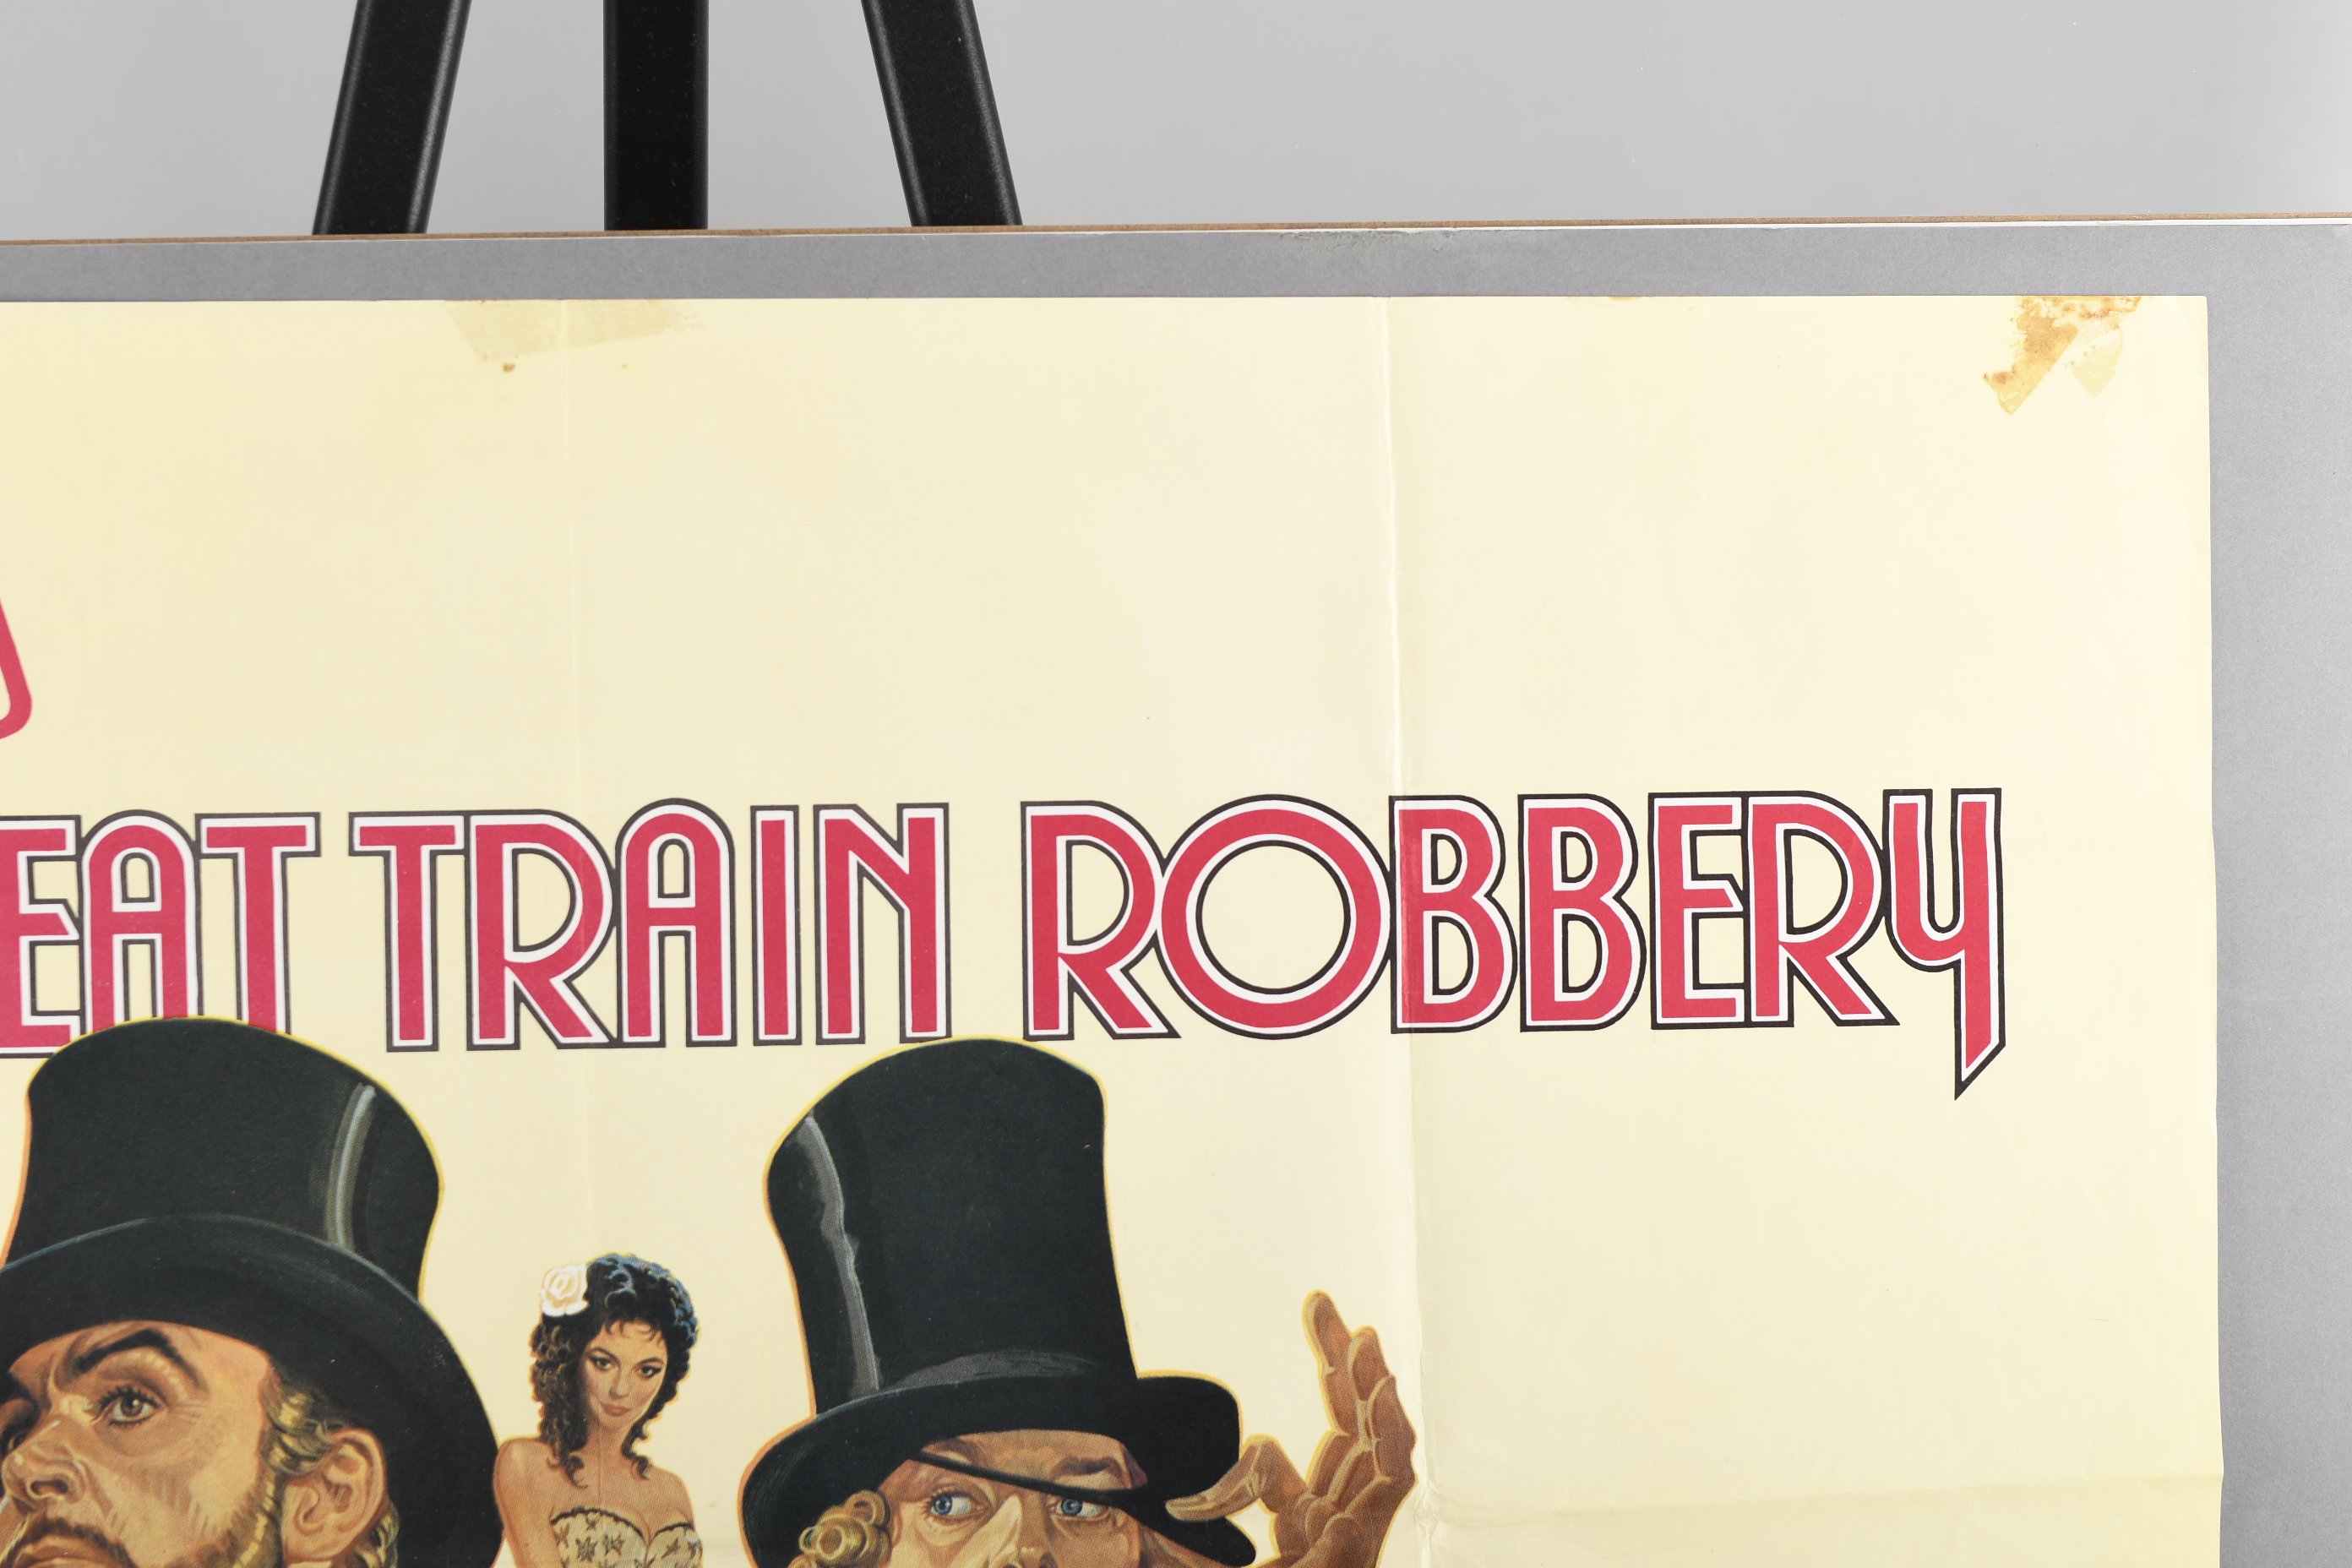 Original "The First Great Train Robbery" Film Poster - Image 4 of 7